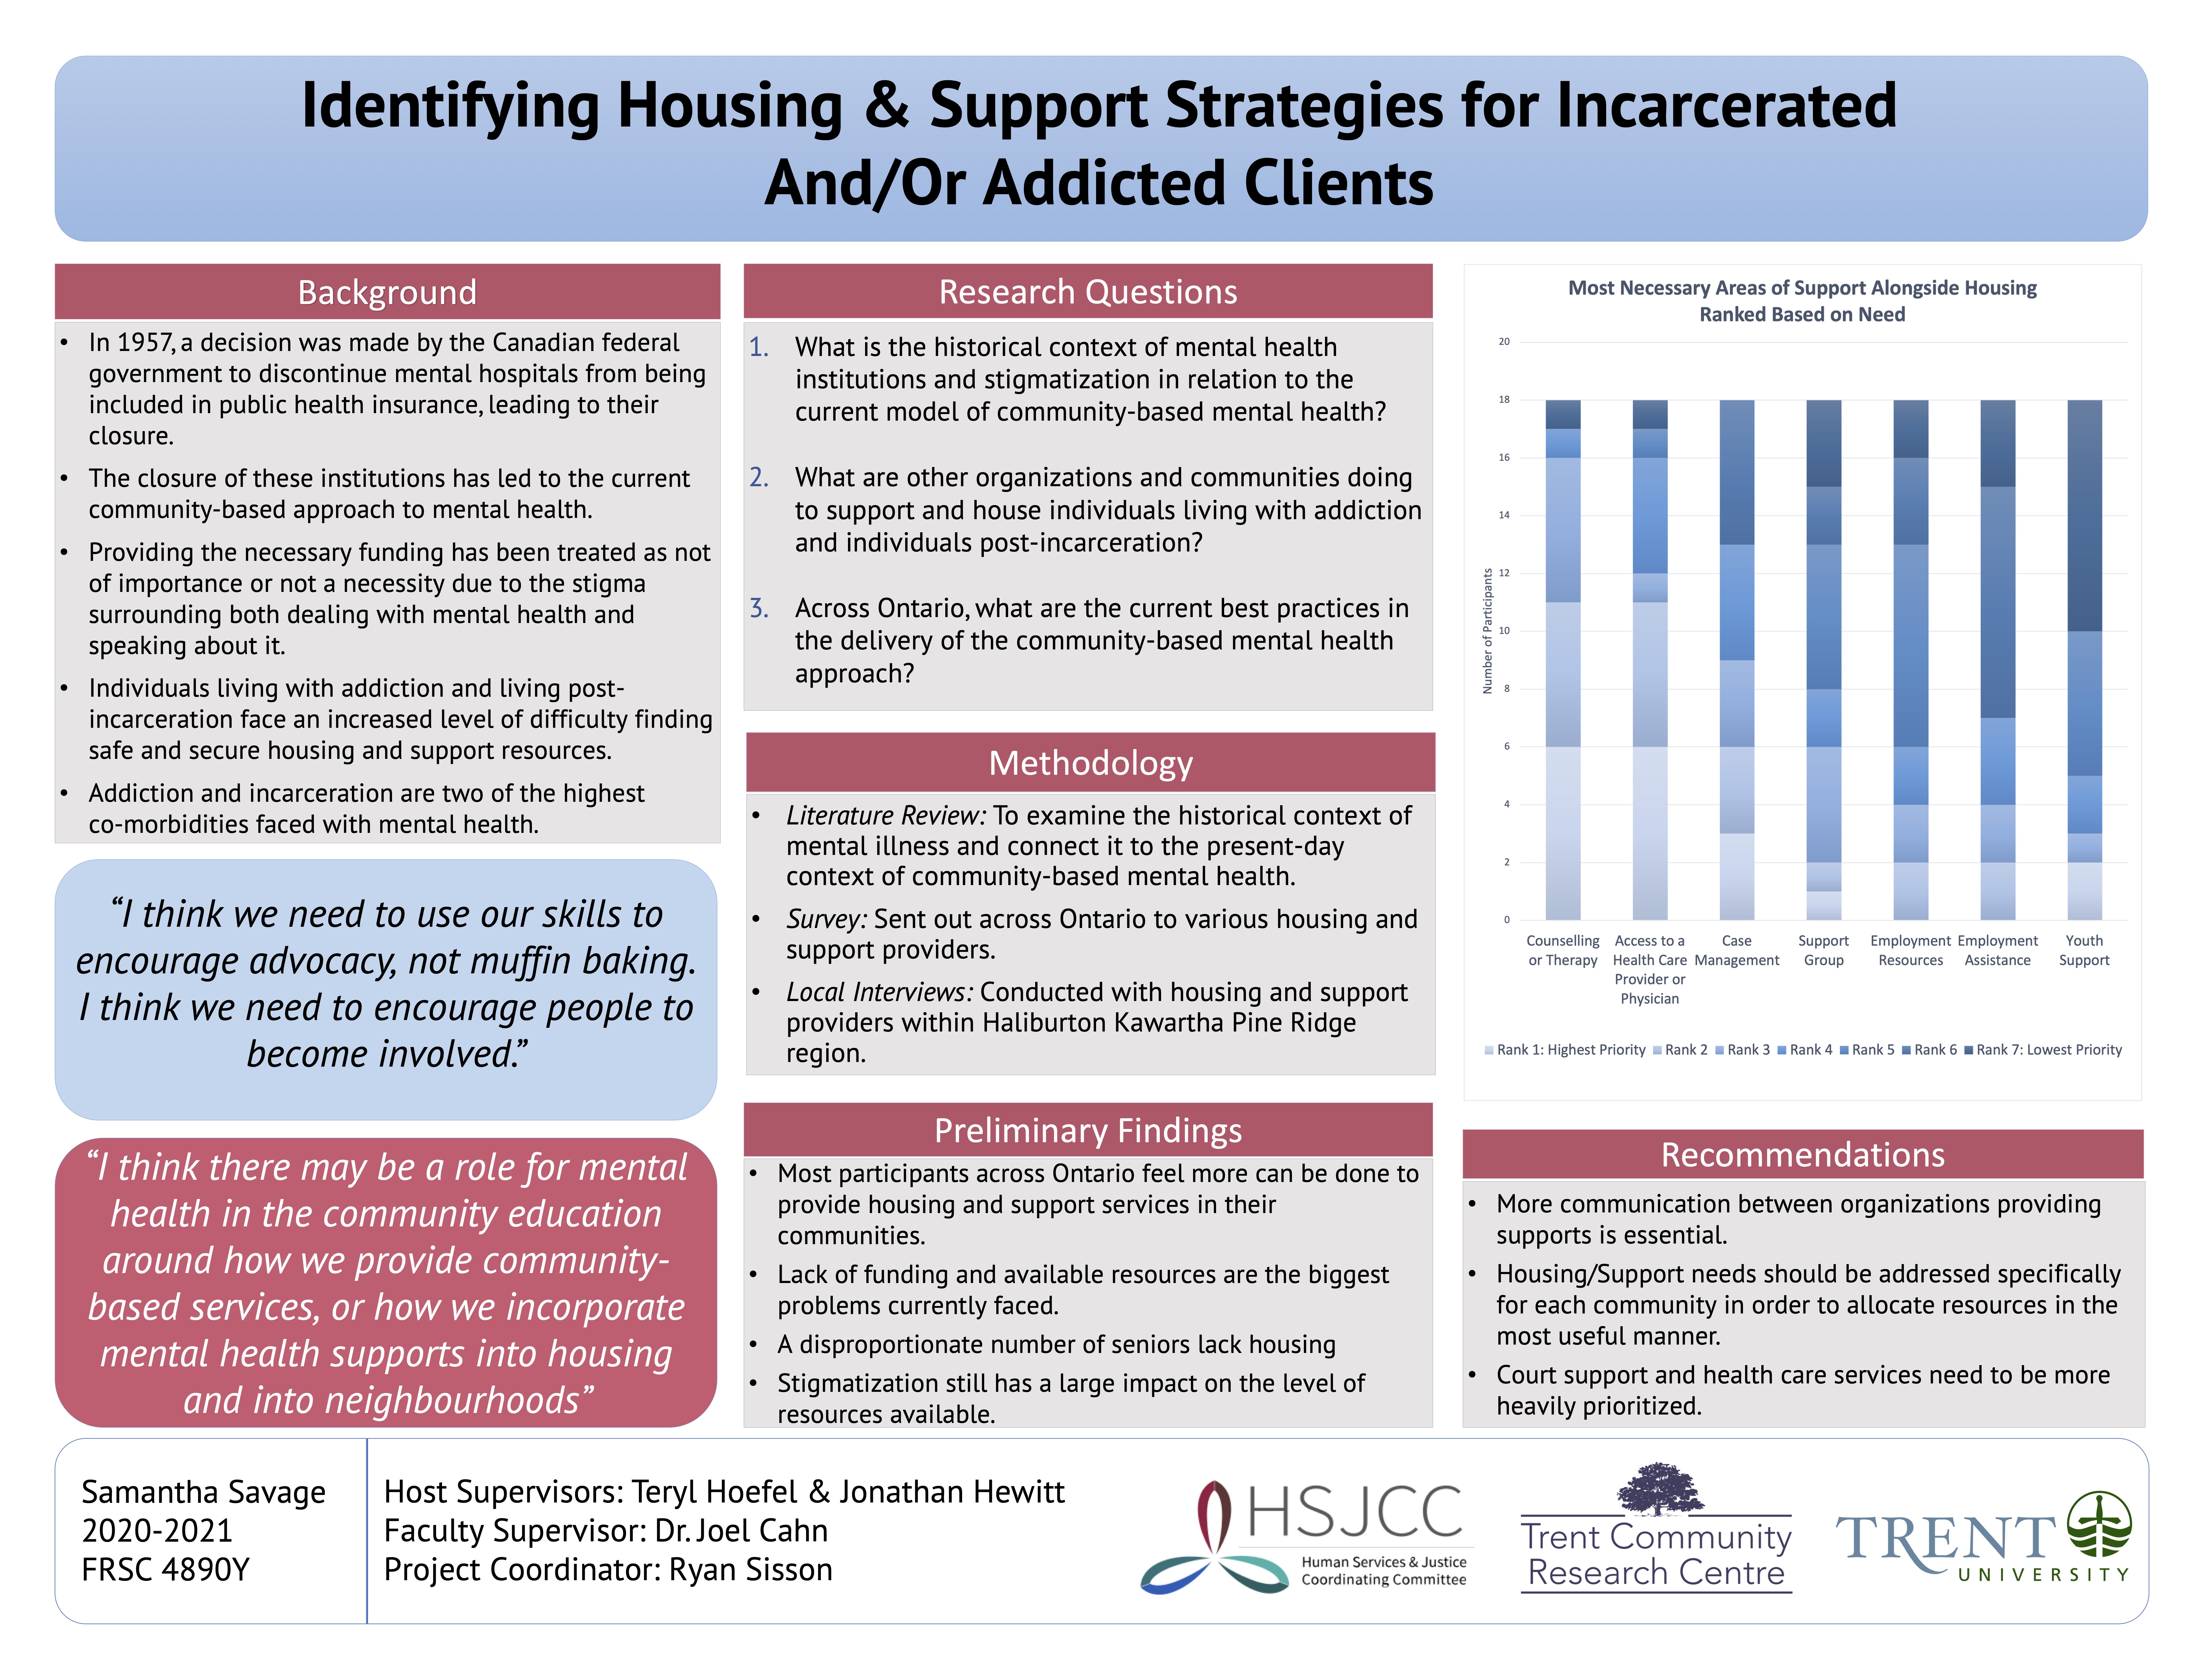 Research Poster for Identifying Housing and Support Strategies for Incarcerated/Substance Abuser Clients